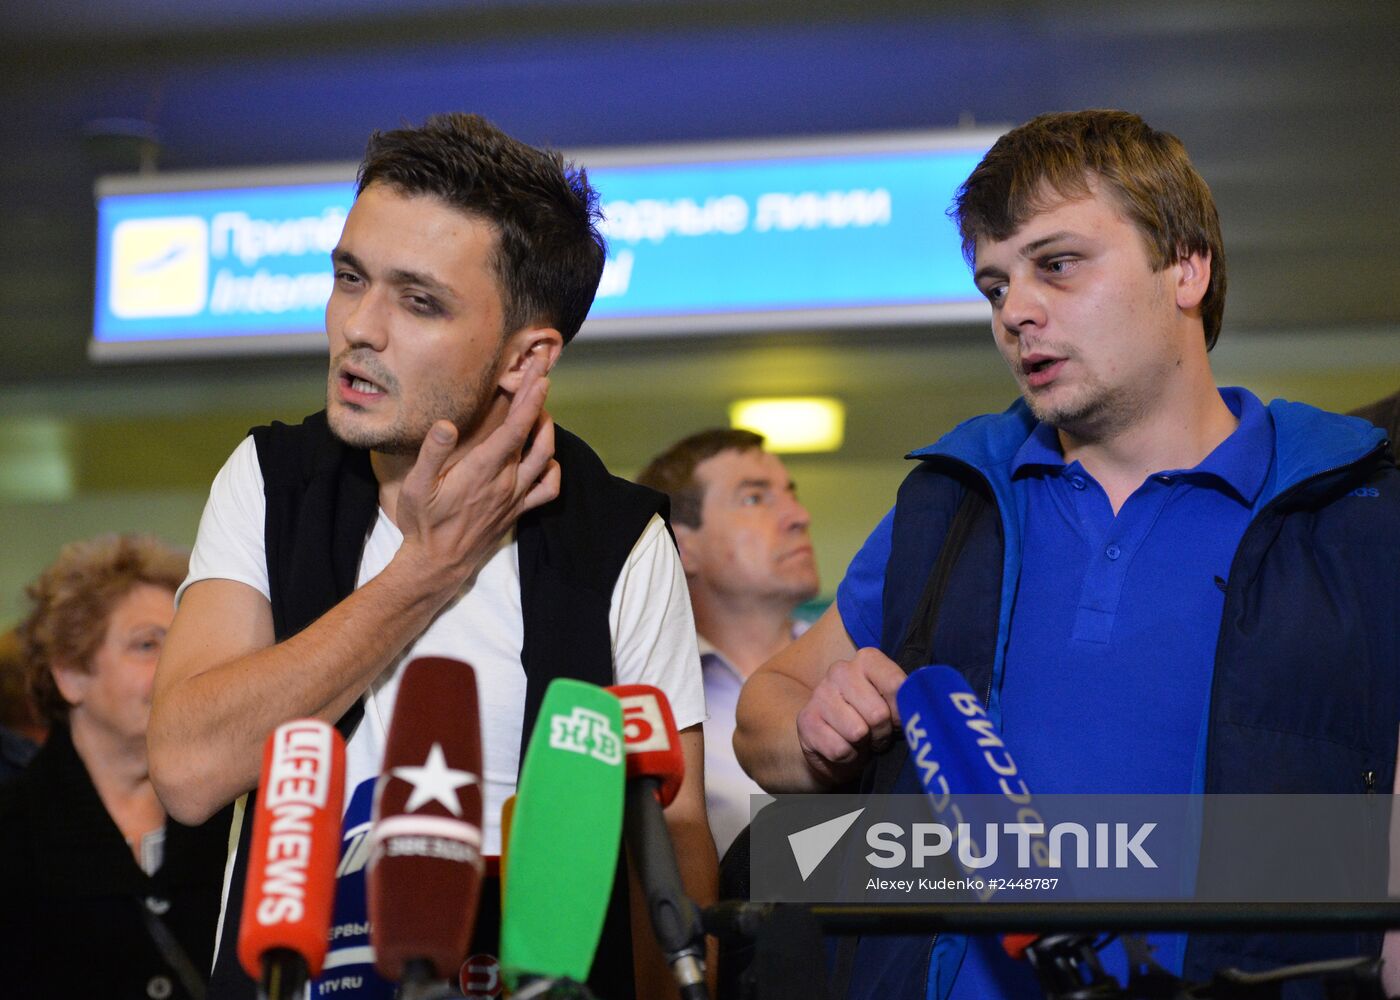 Russian Zvezda TV channel reporters released in Ukraine are welcomed back home